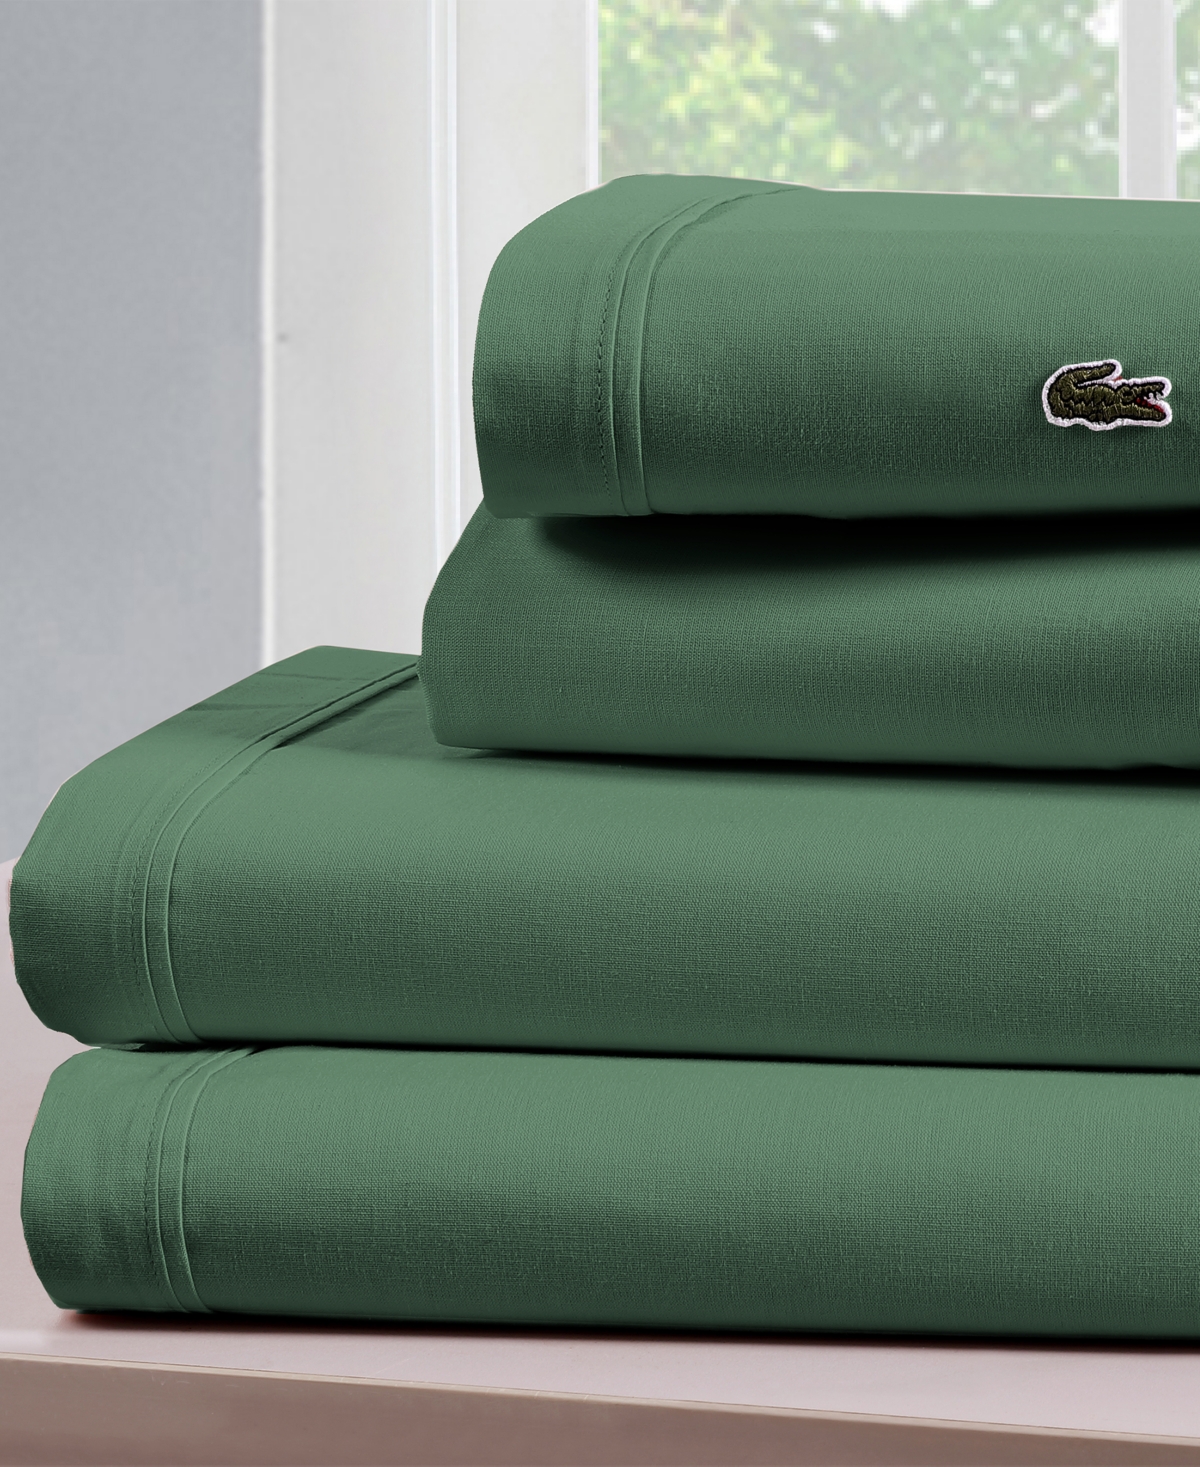 Lacoste Home Solid Cotton Percale Sheet Set, California King In Ivy Green